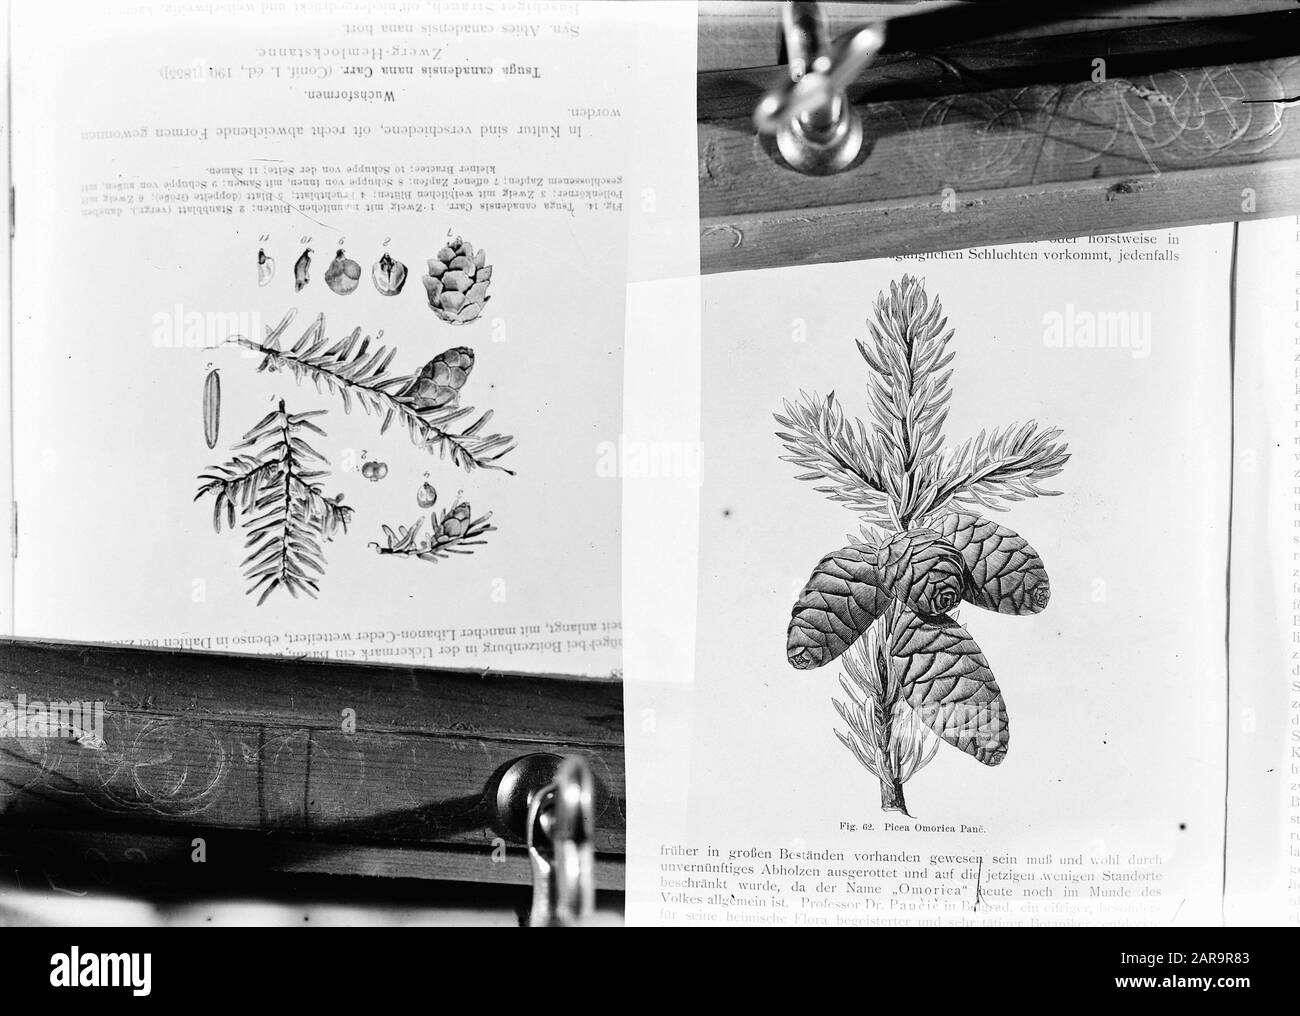 reproductions, coniferous wood, picea omorica, tsuga canadensis Date: undated Keywords: coniferous, reproductions Personal name: picea omorica, tsuga canadensis Stock Photo